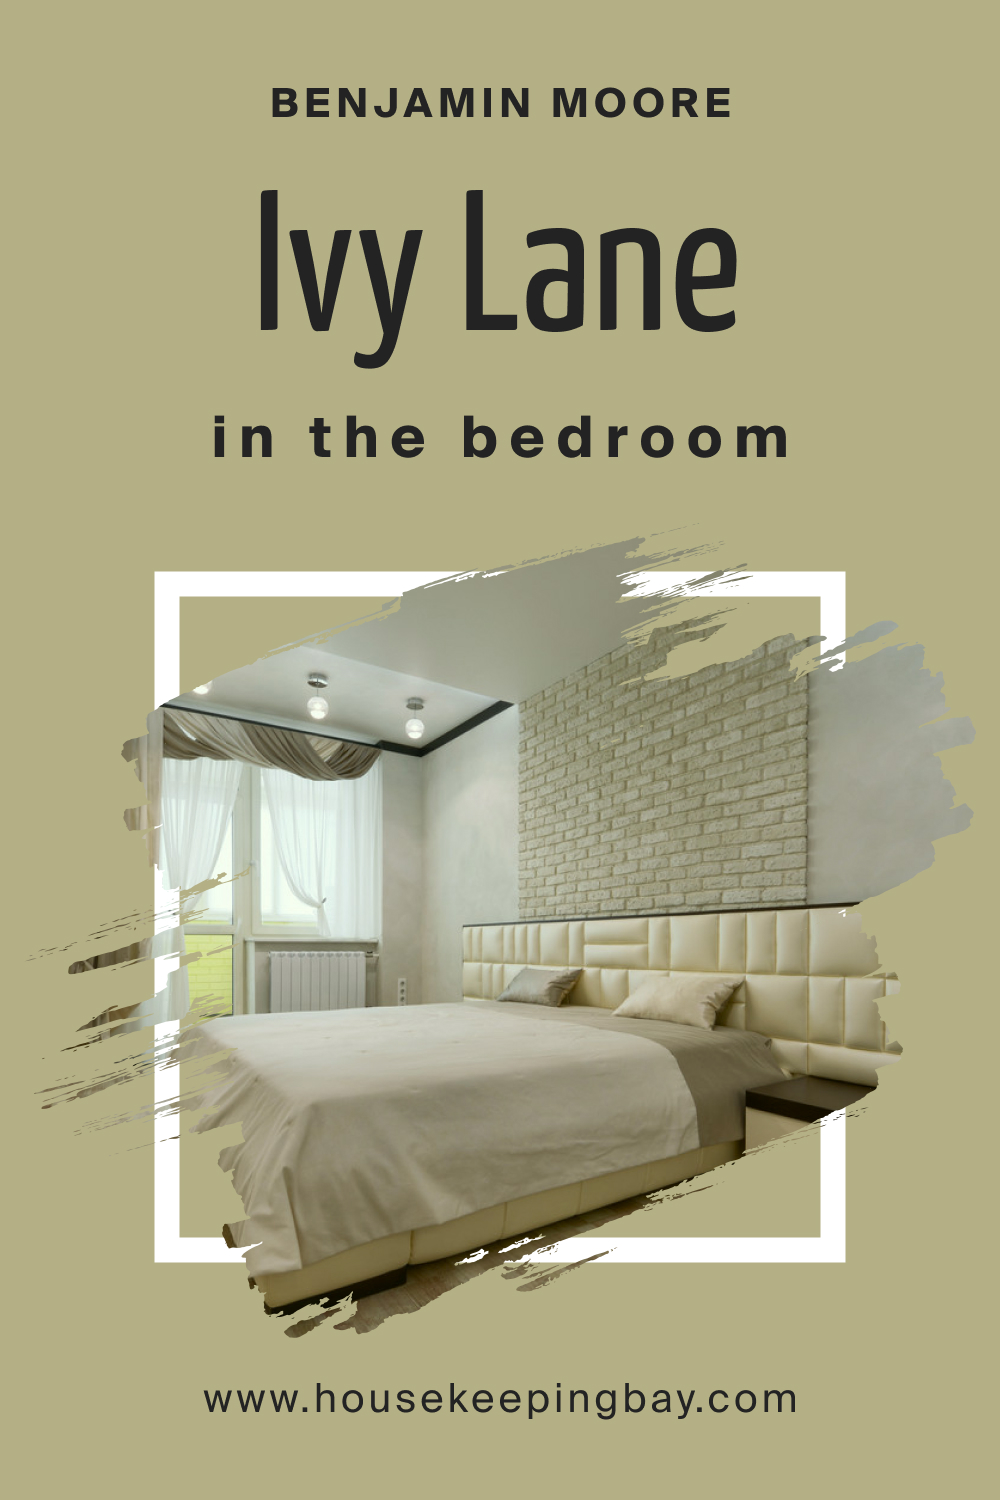 How to Use BM Ivy Lane 523 in the Bedroom?